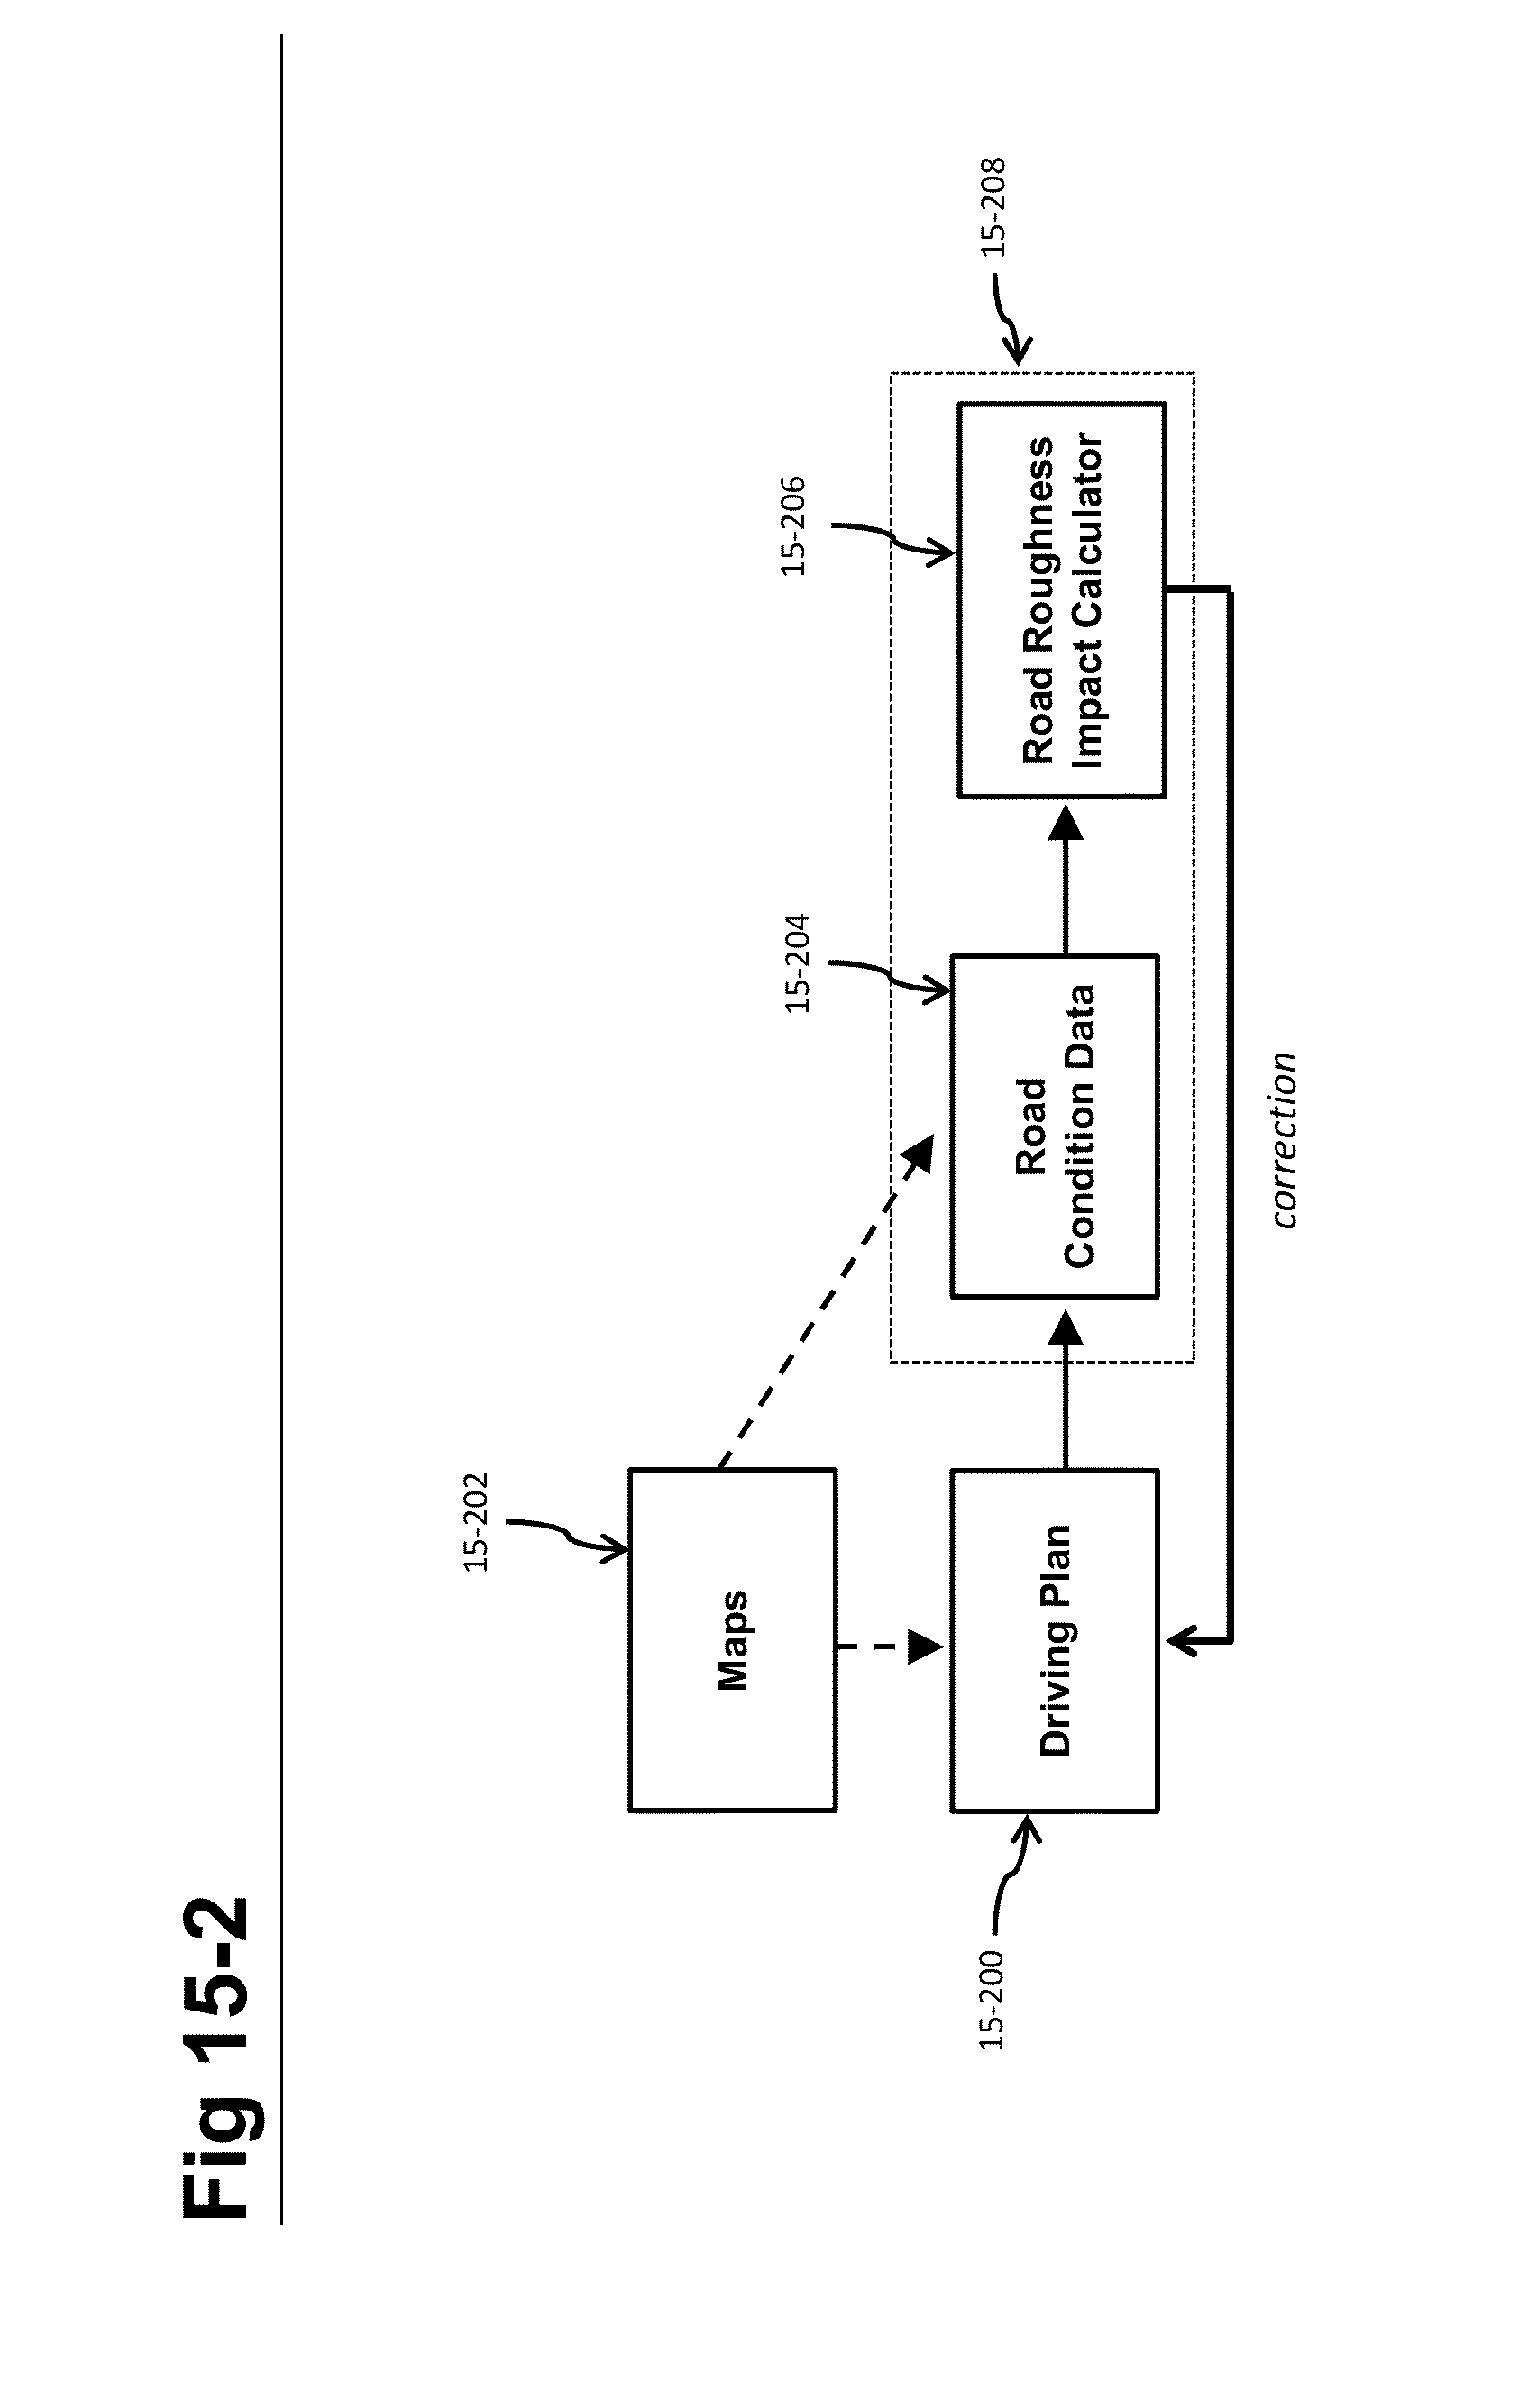 Self-driving vehicle with integrated active suspension